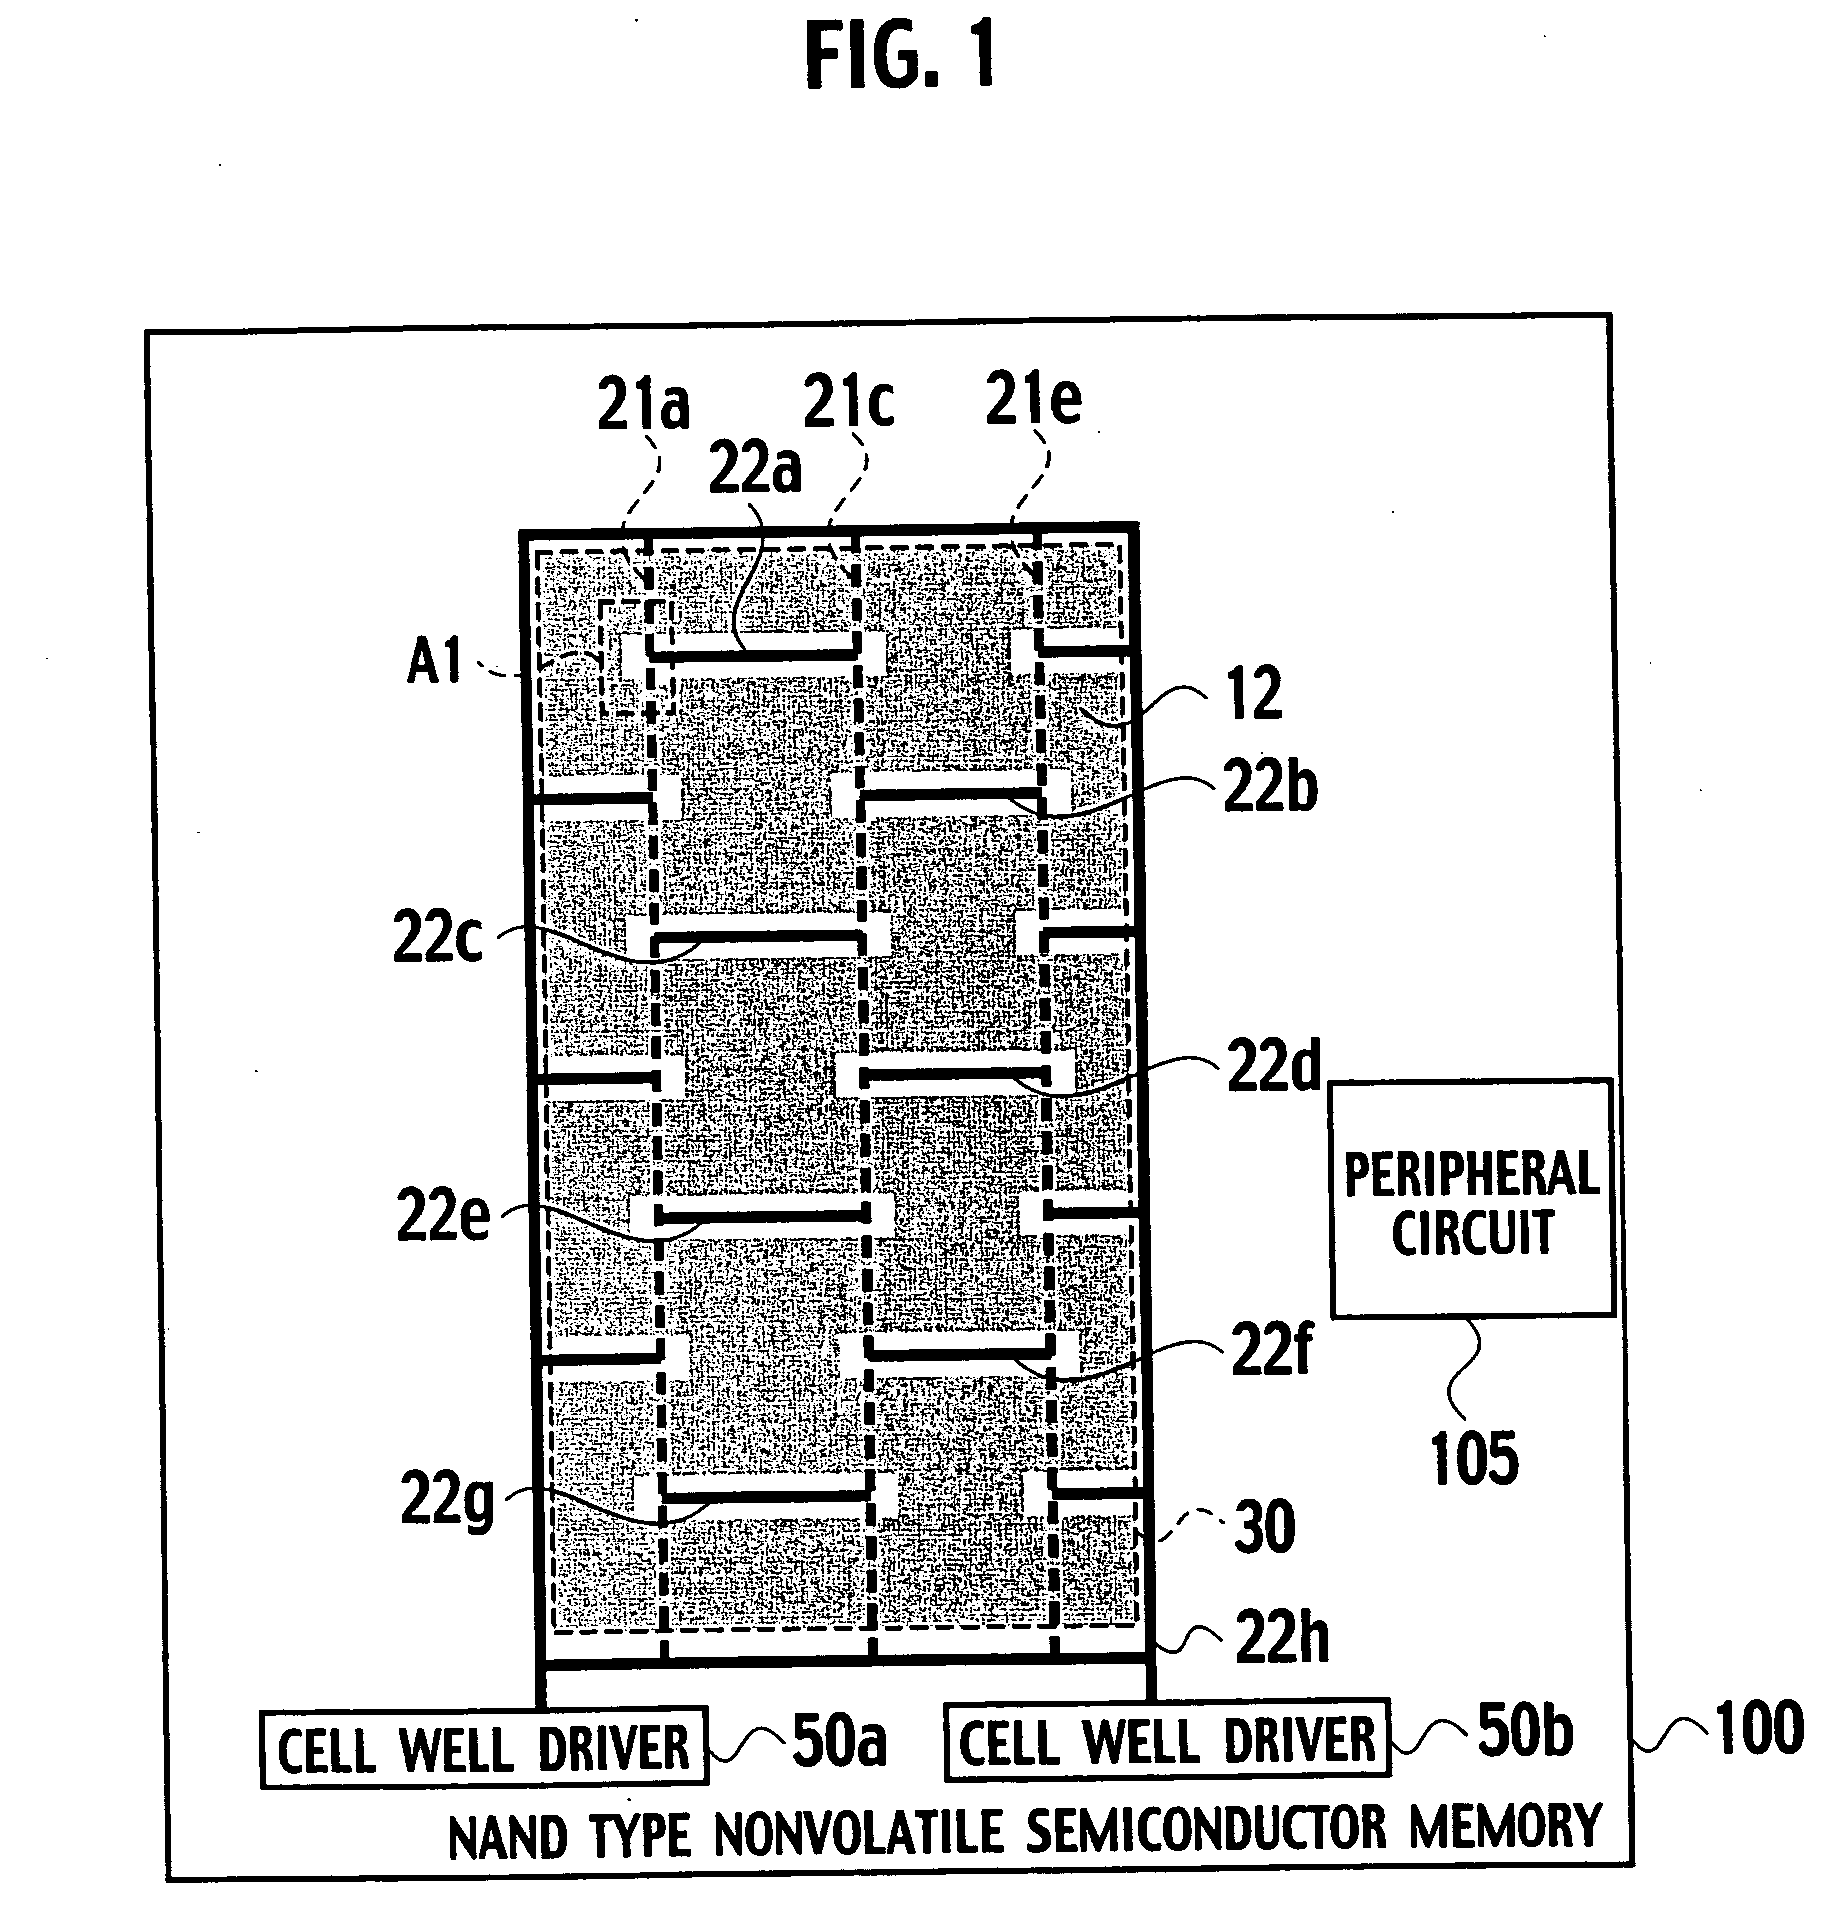 Nonvolatile semiconductor memory having a plurality of interconnect layers